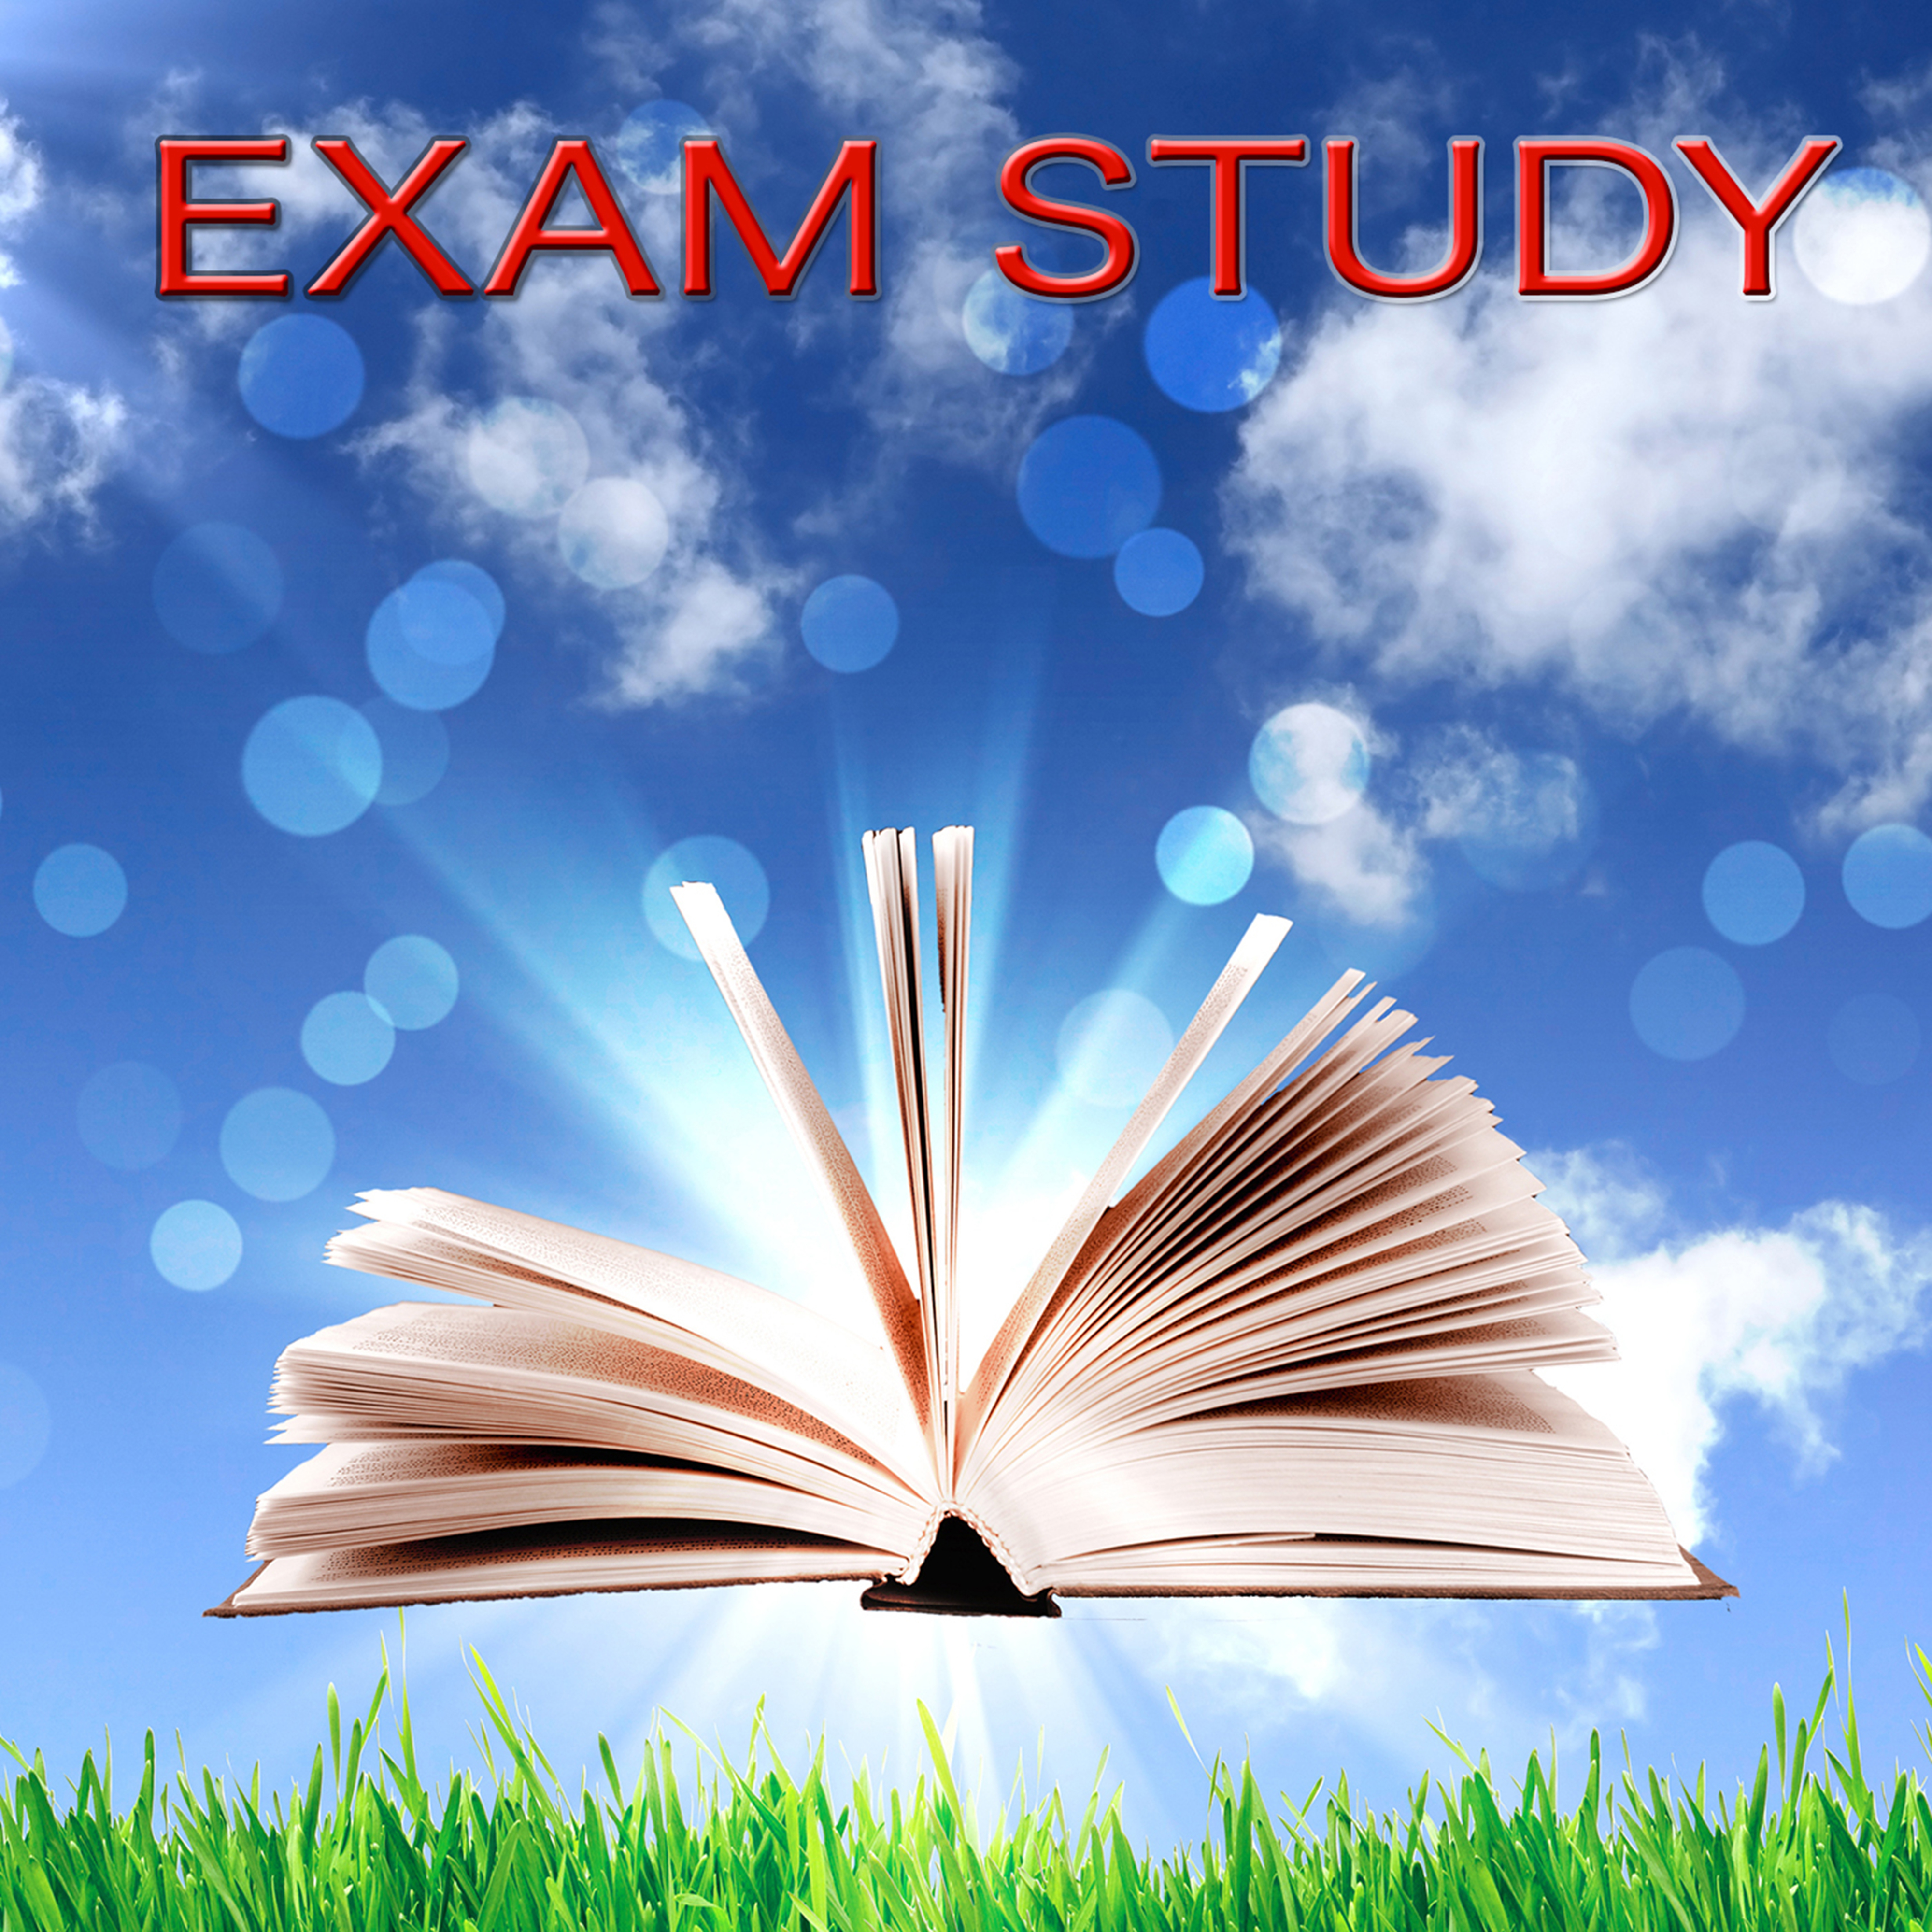 Exam Study - Relaxing New Age Concentration Music for Studying, Brain Food to Increase Brain Power & Concentration With Nature Sounds